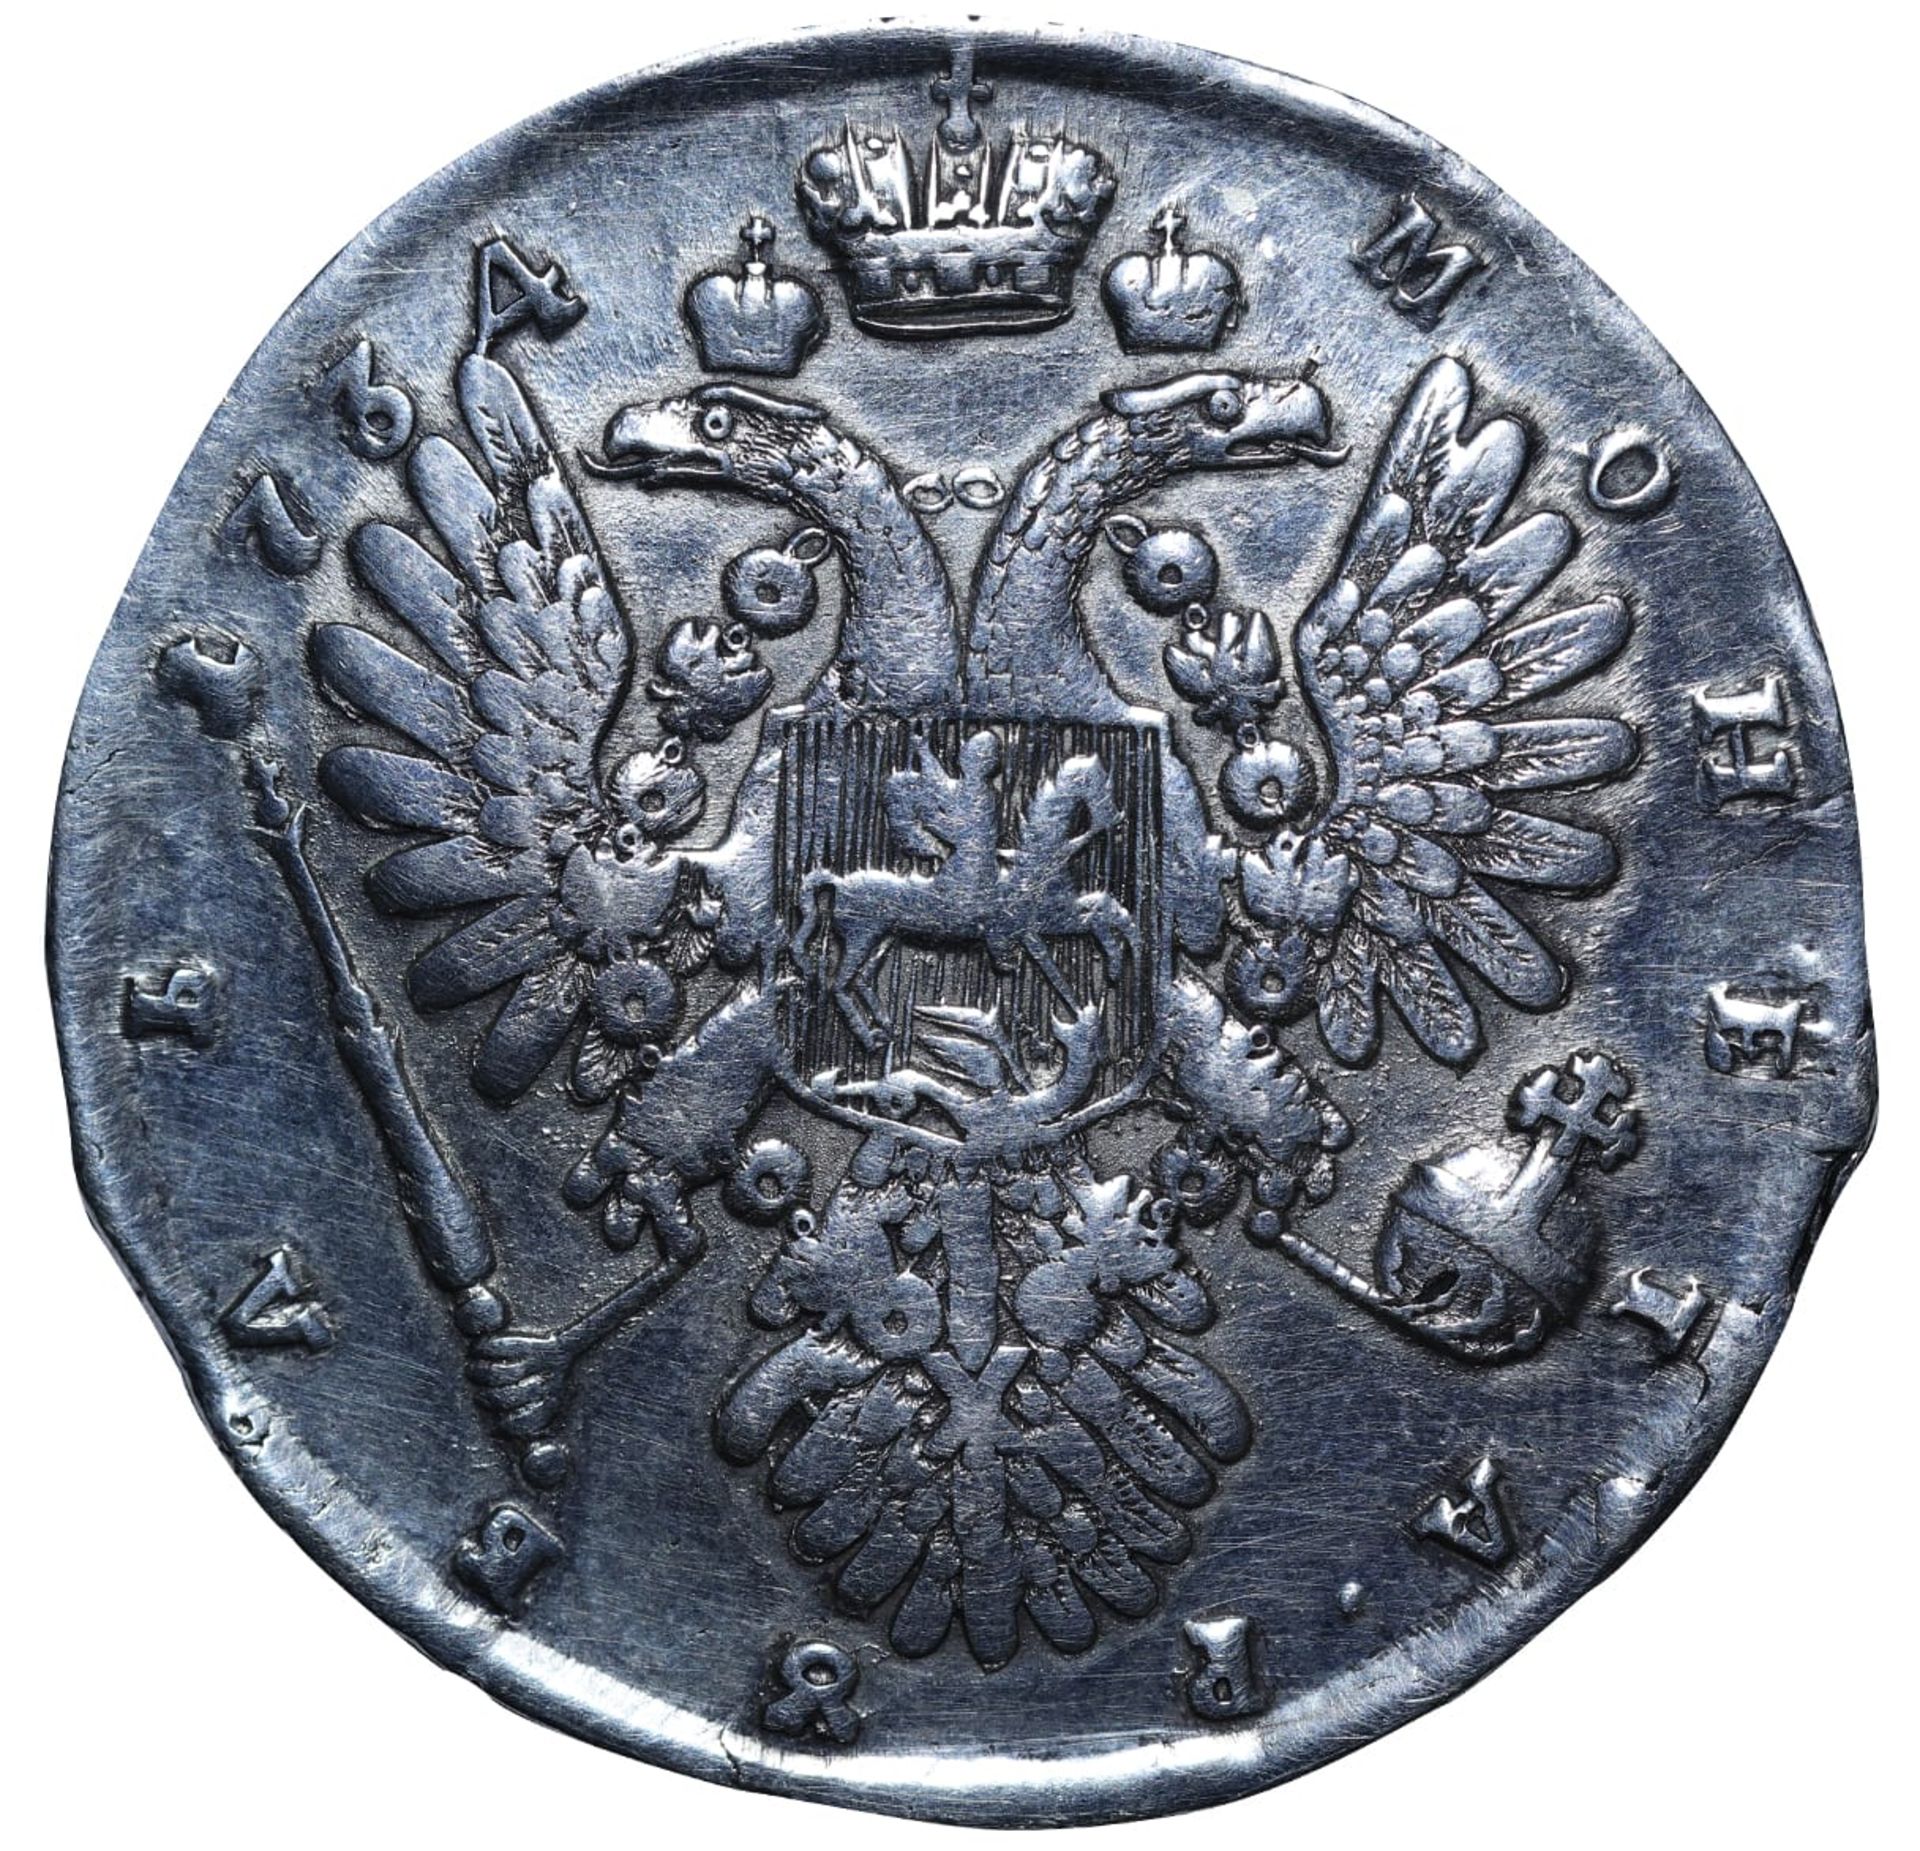 Russian Empire, 1 Rouble, 1734 year, Bitkin 108 (R) - Image 3 of 3